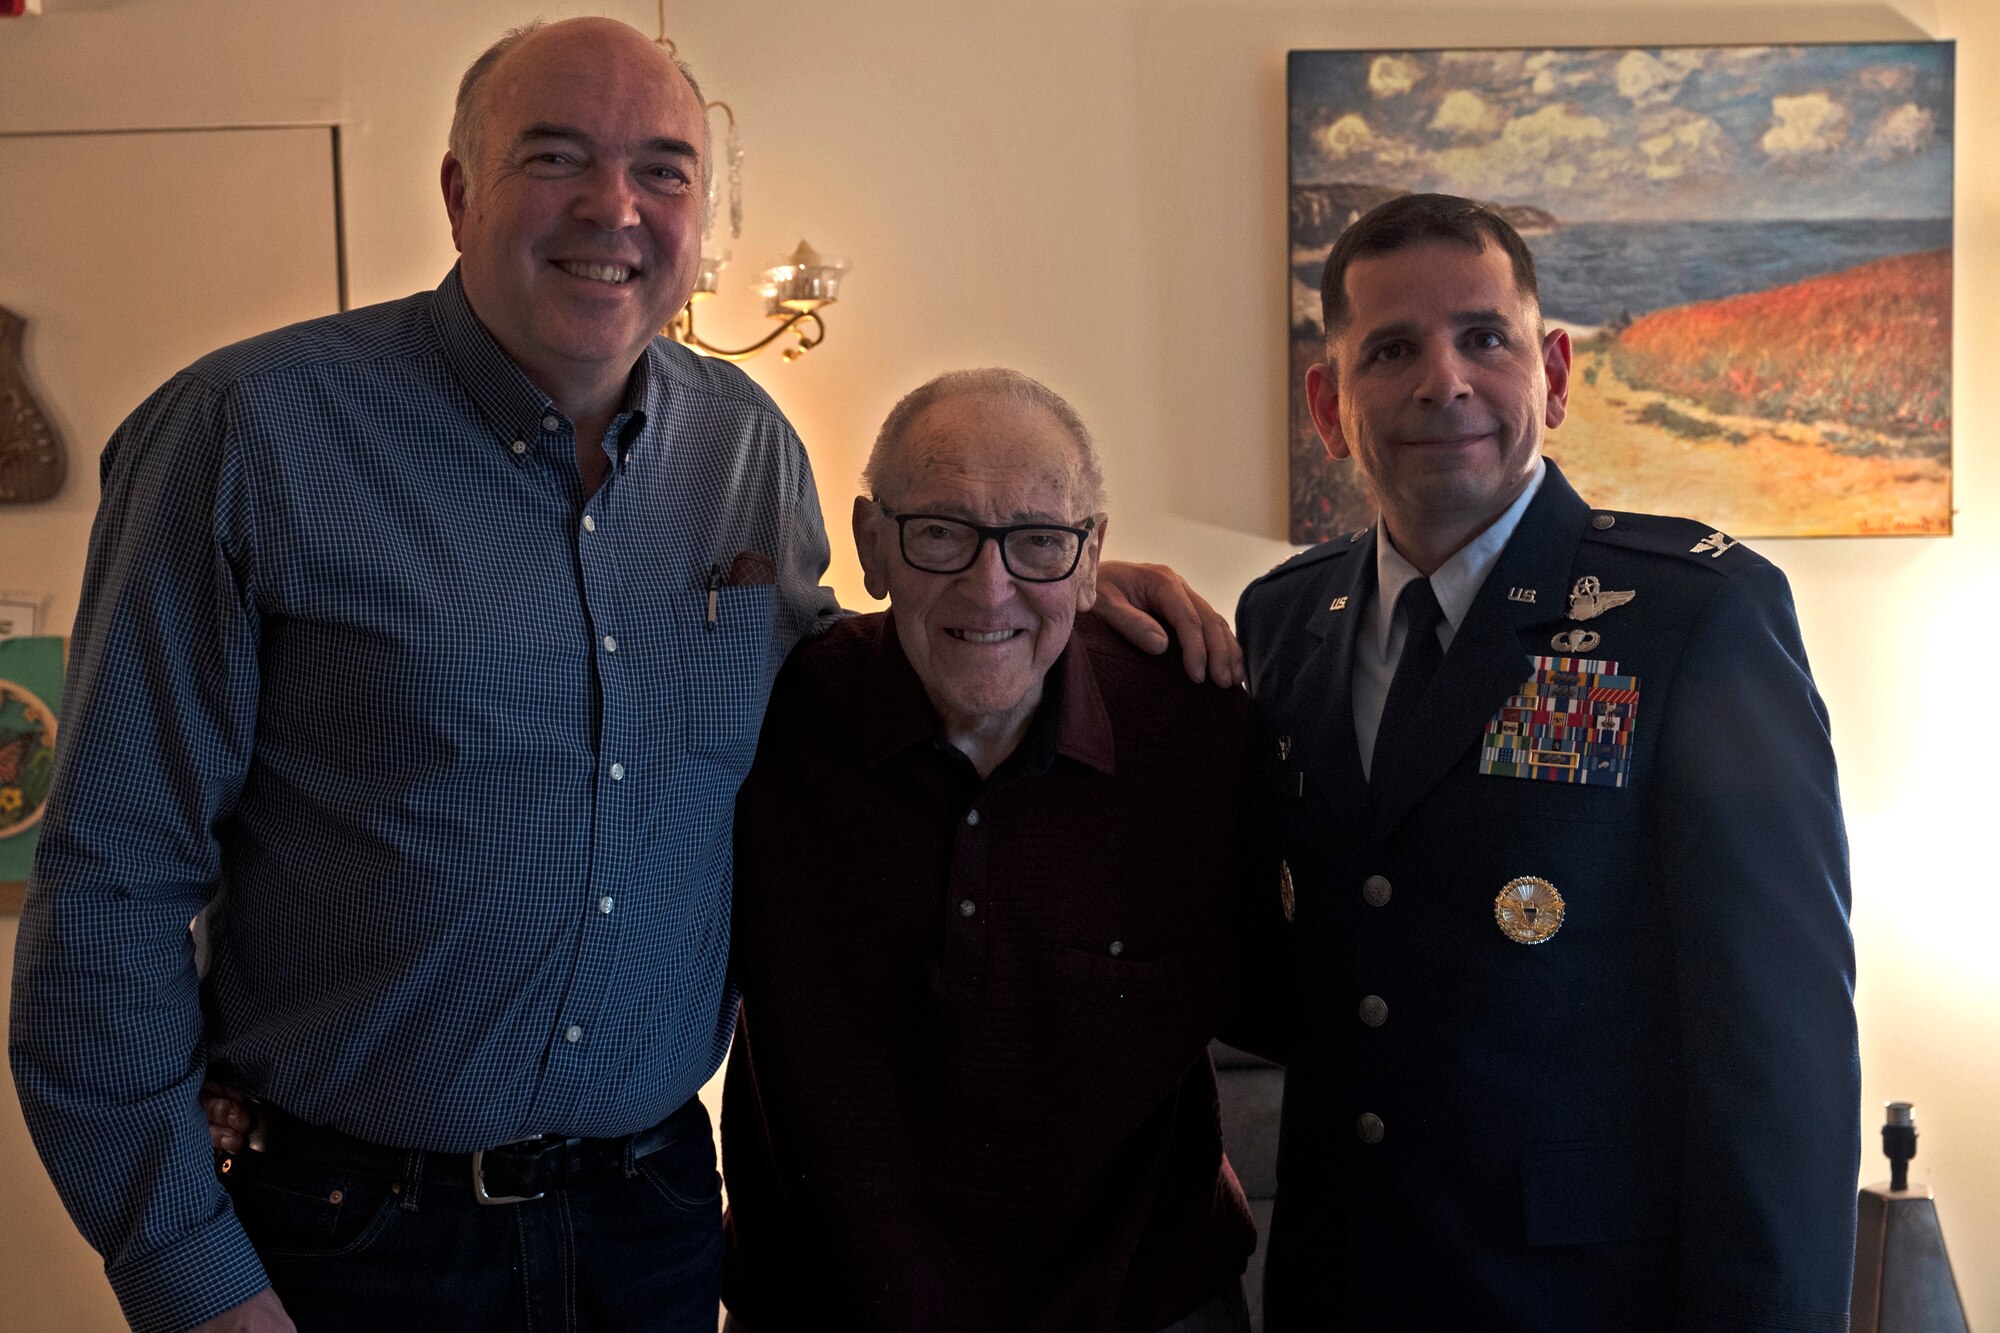 (Center) Retired U.S. Air Force Maj. James Slaeker, a WWII pilot, poses for a photo with his son Ted and Col. Sergio Anaya, 62nd Operations Group commander, during a surprise visit from Anaya in celebration of his 100th birthday in Shoreline, Washington, March 25, 2022. Upon becoming a pilot, Slaeker would serve during three wars, including WWII and the Korean War. (U.S. Air Force photo/Senior Airman Zoe Thacker)